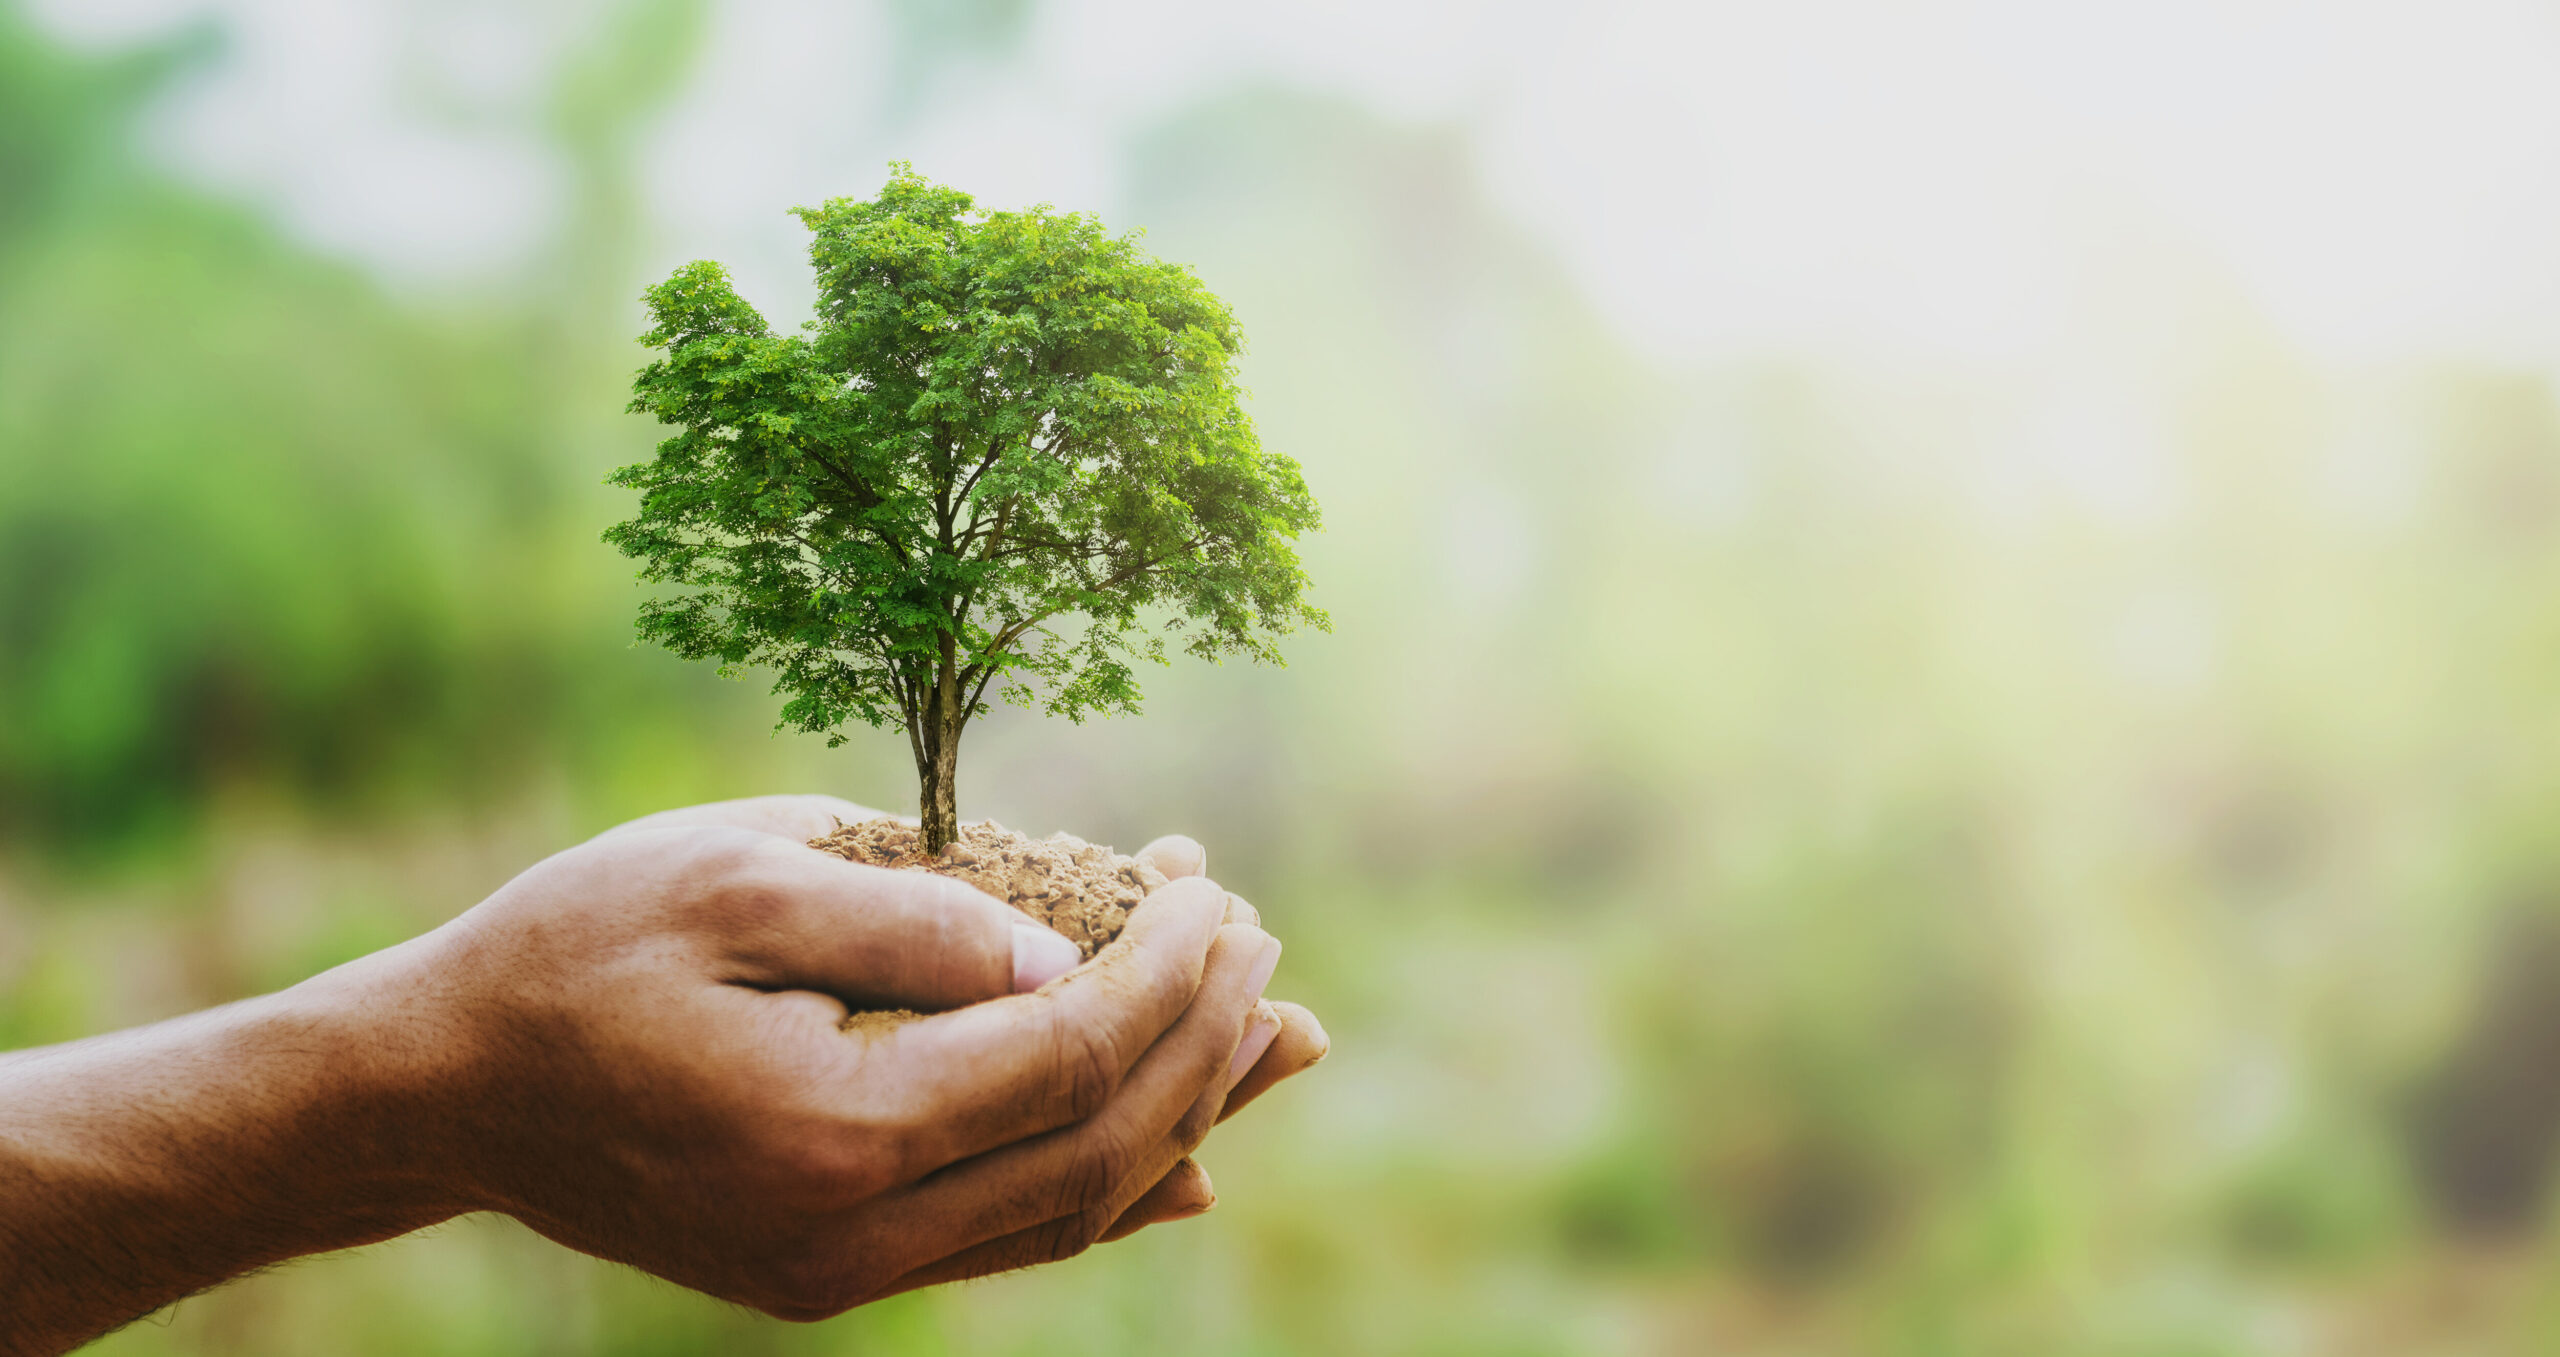 Truck Banner’s Sustainability Initiative: 2023 trees for 2023